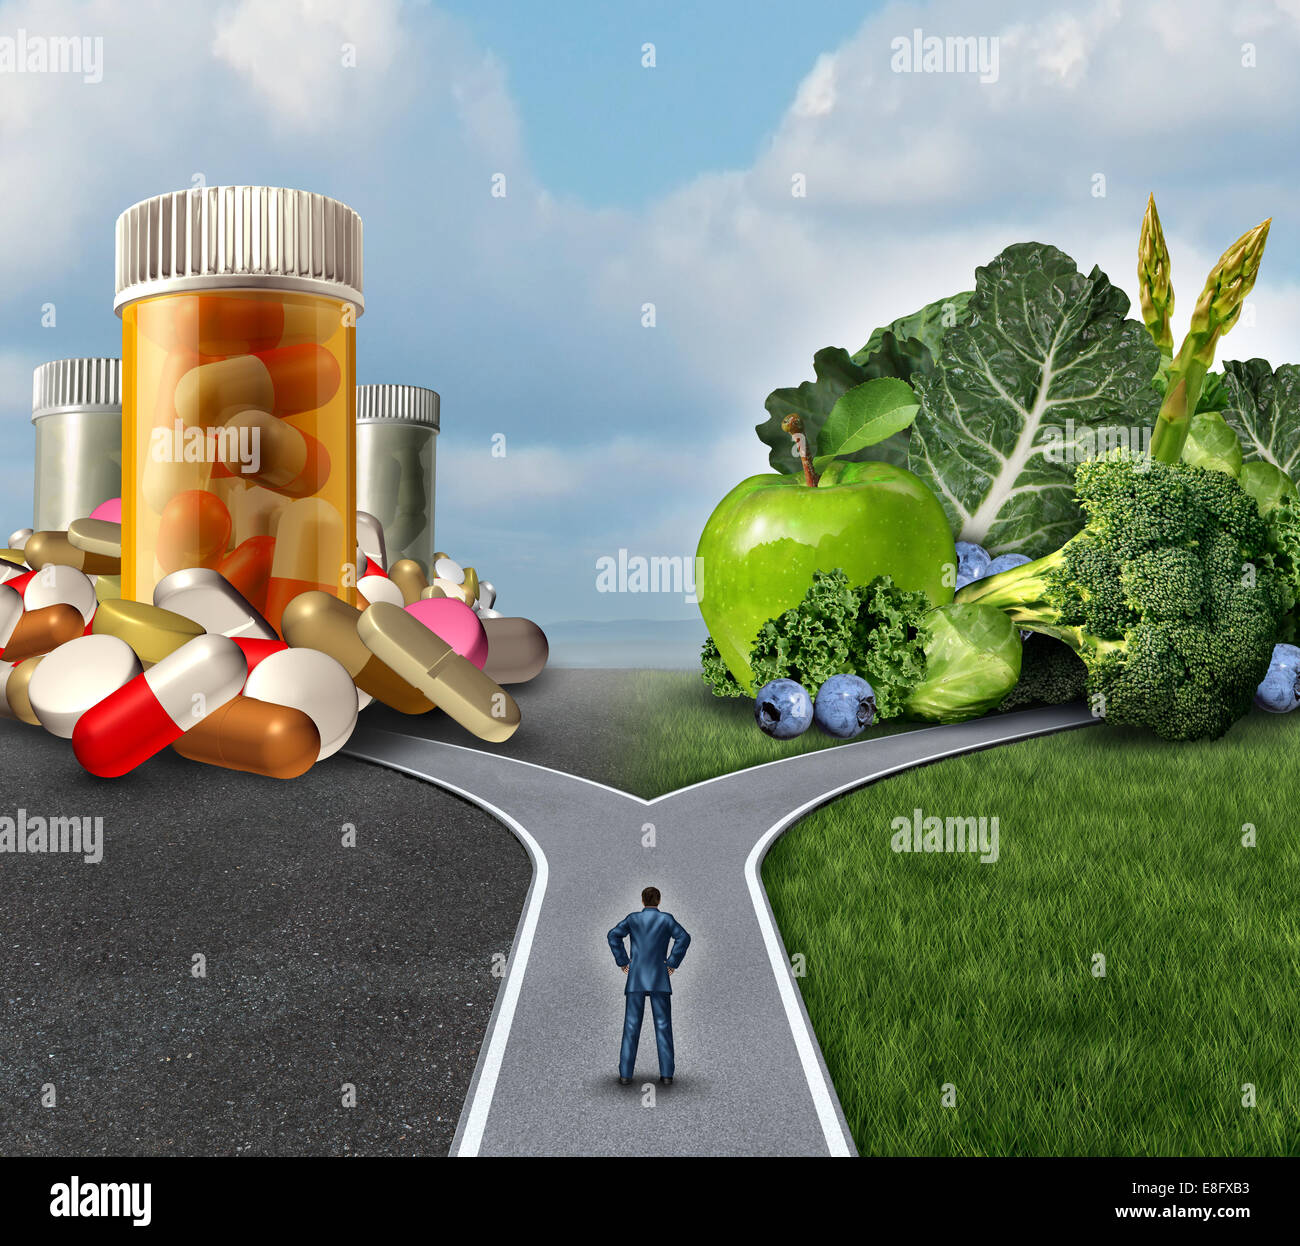 Medication decision concept and natural remedy nutrition choices dilemma between healthy fresh fruit and vegetables or pharmaceutical pills and prescription drugs with a man on a crossroad trying to decide the best path to health. Stock Photo